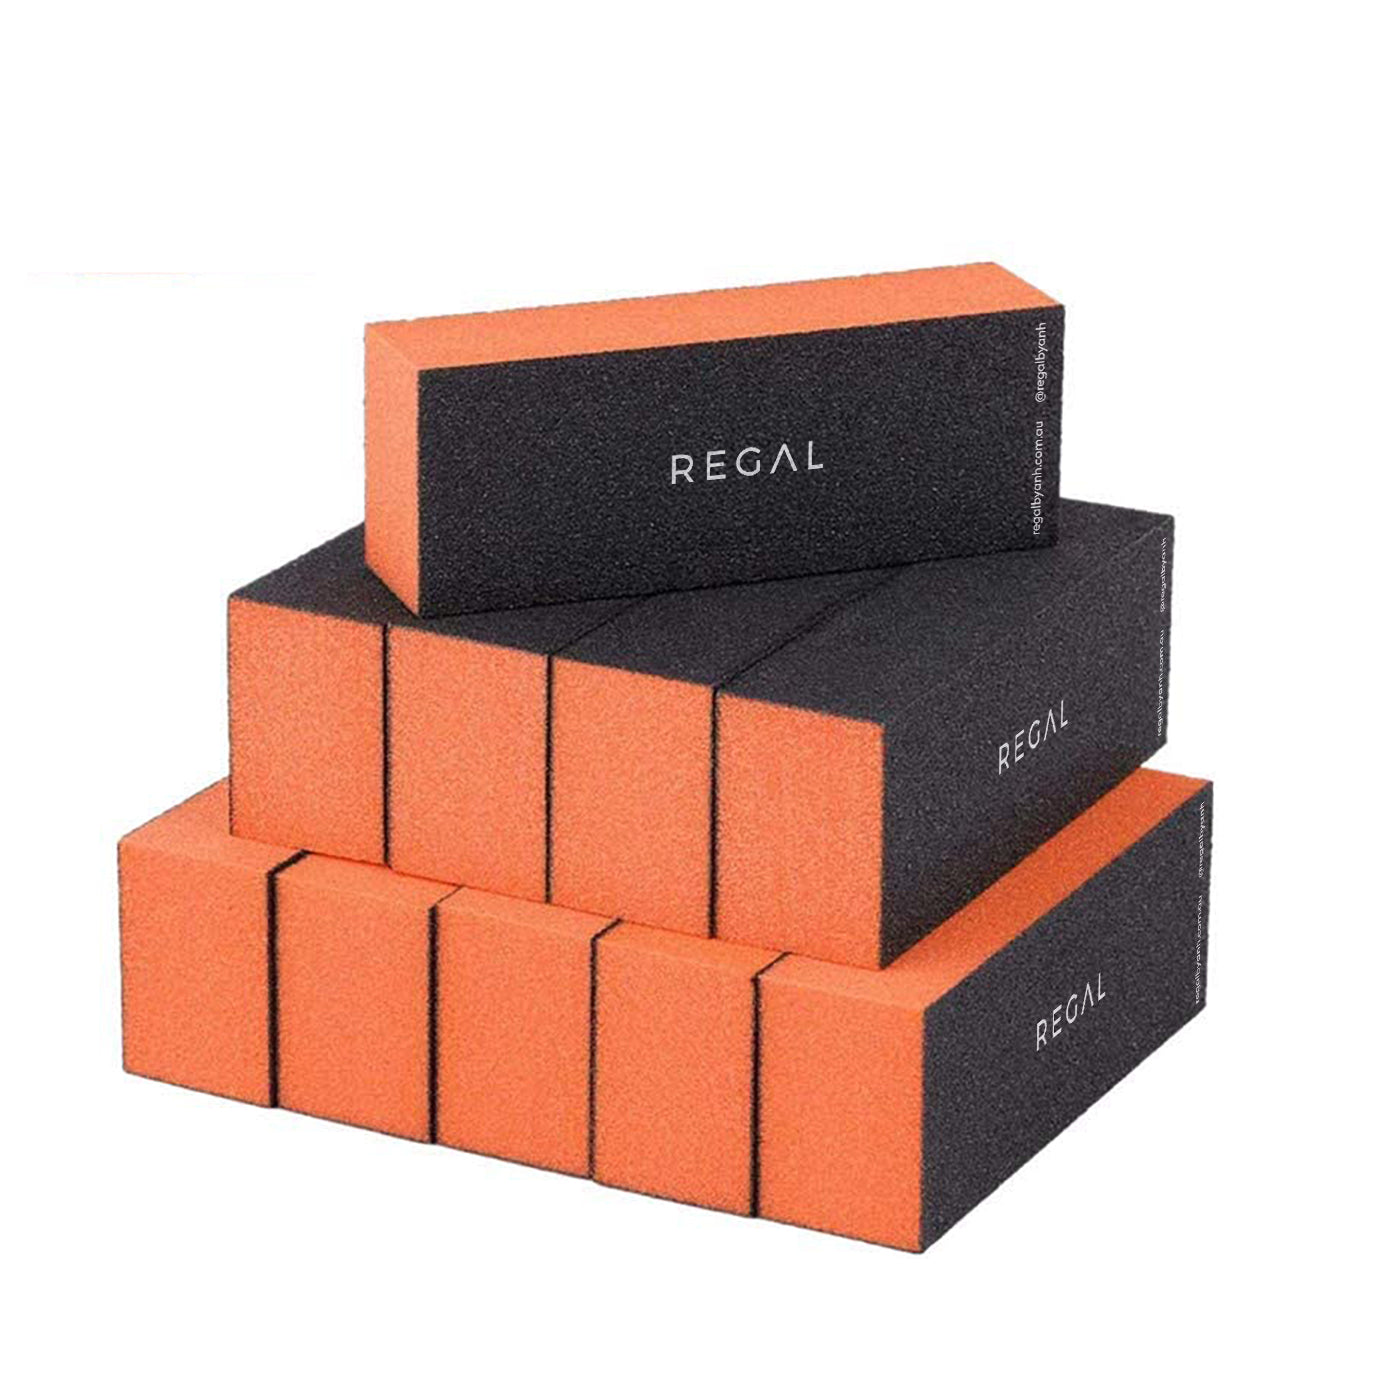 Regal by Anh Orange Buffing Block 10 Pack - Large